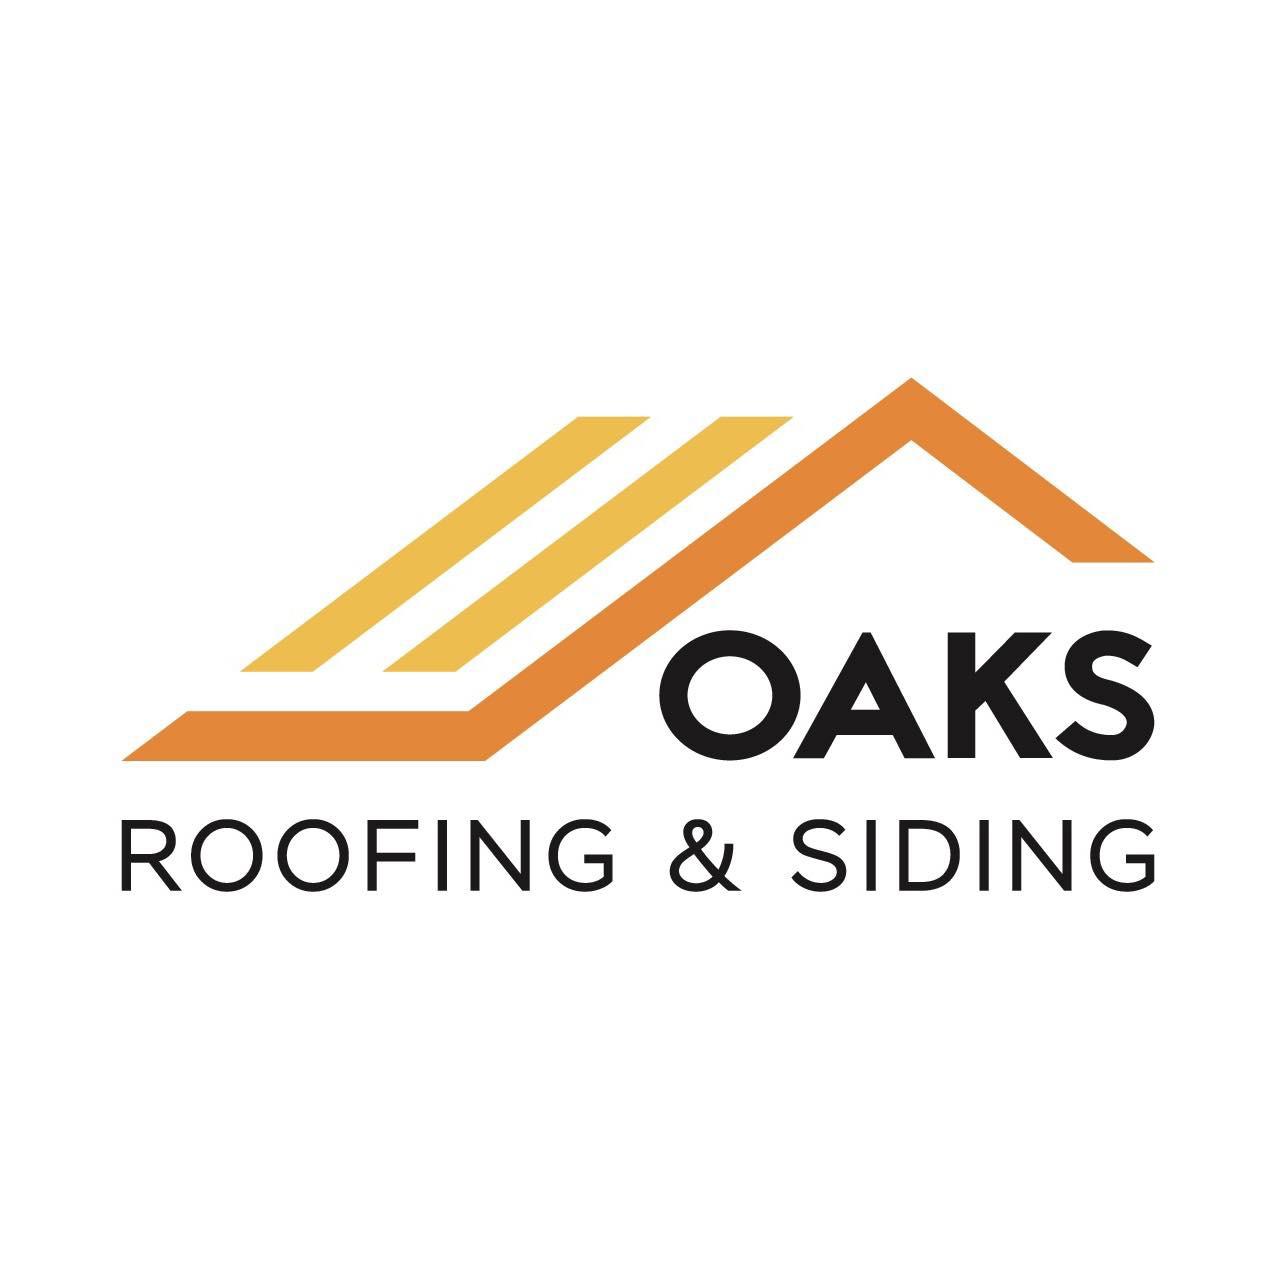 Oaks Roofing and Siding - Pittsburgh, PA 15212 - (412)887-6257 | ShowMeLocal.com